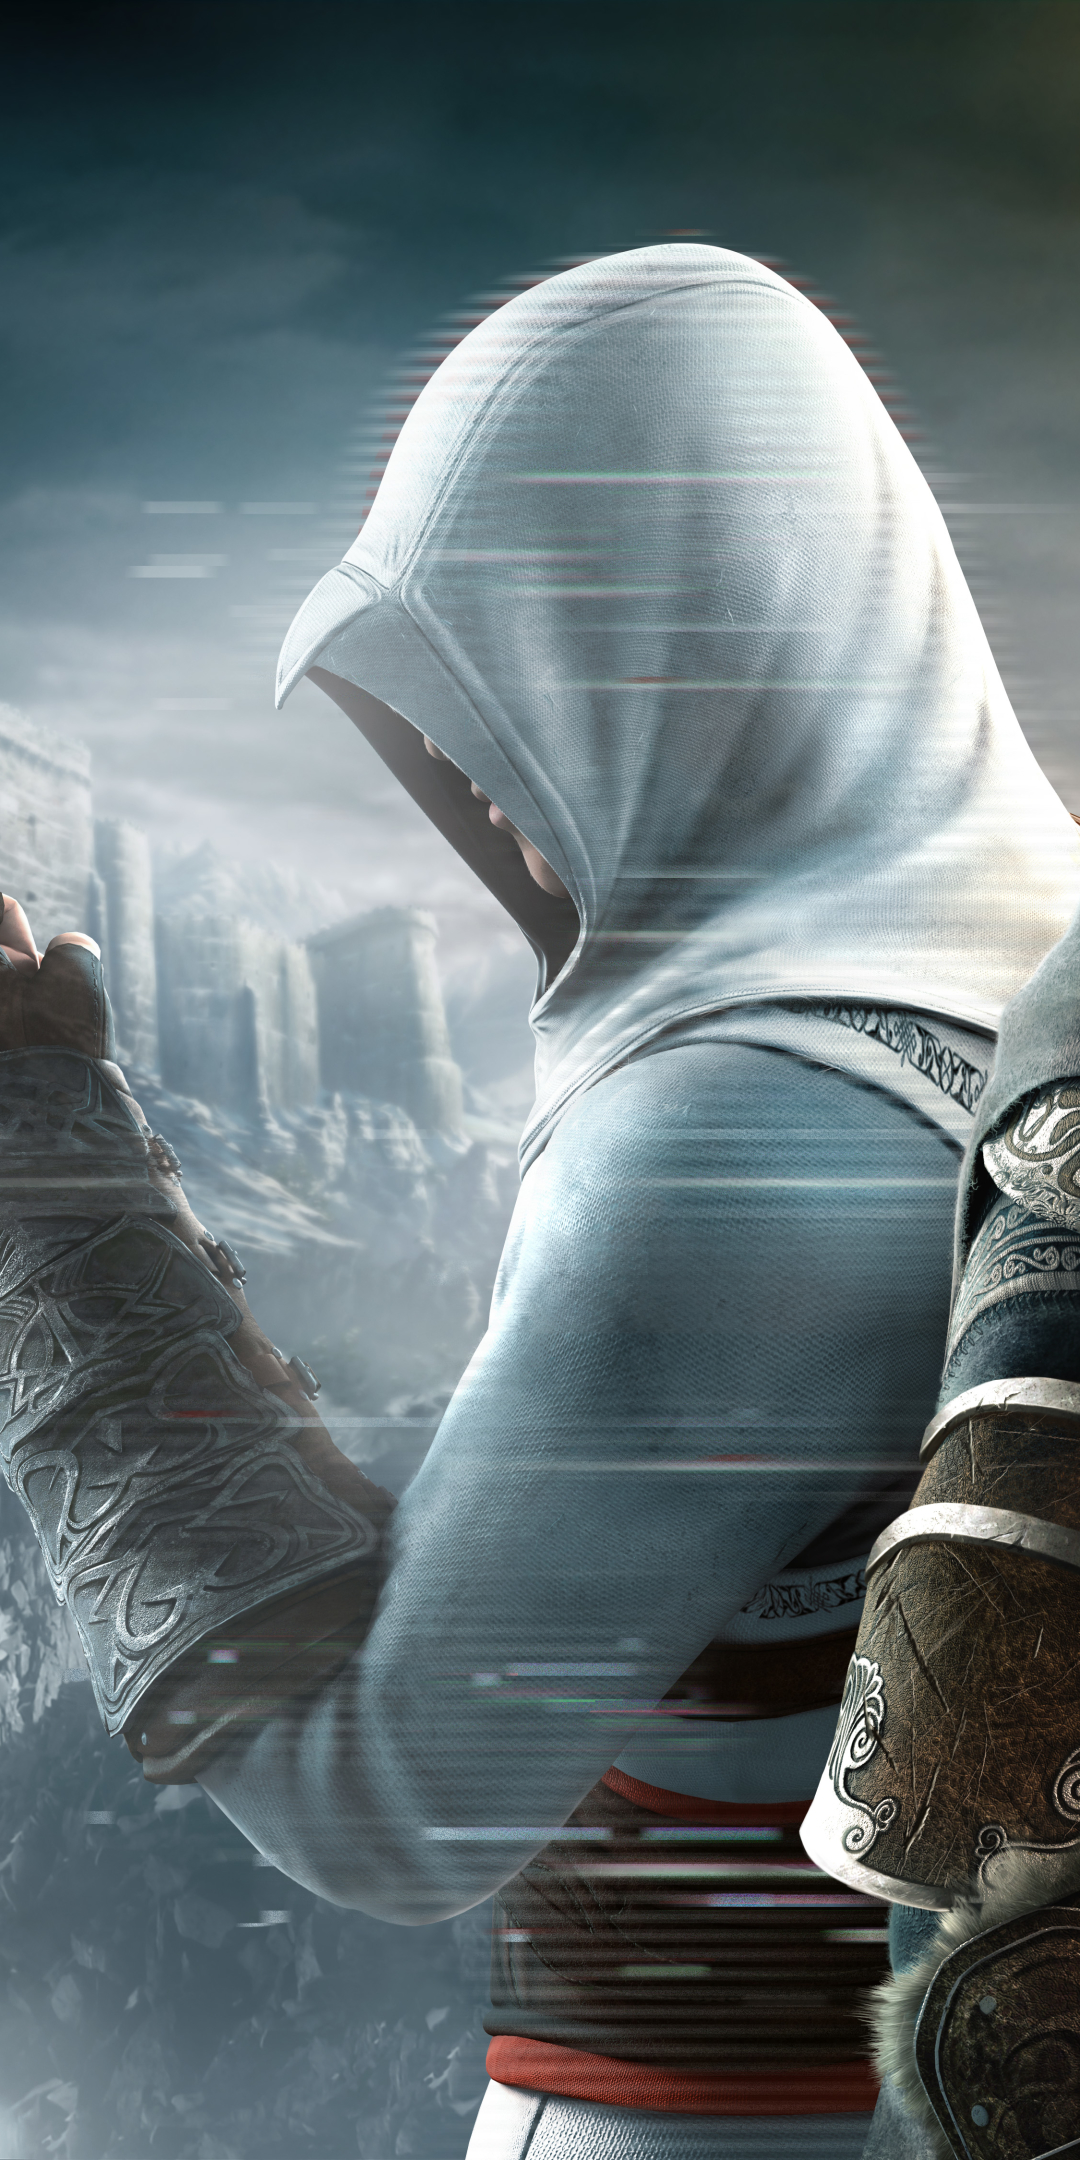 Download mobile wallpaper Assassin's Creed, Video Game, Assassin's Creed: Revelations for free.